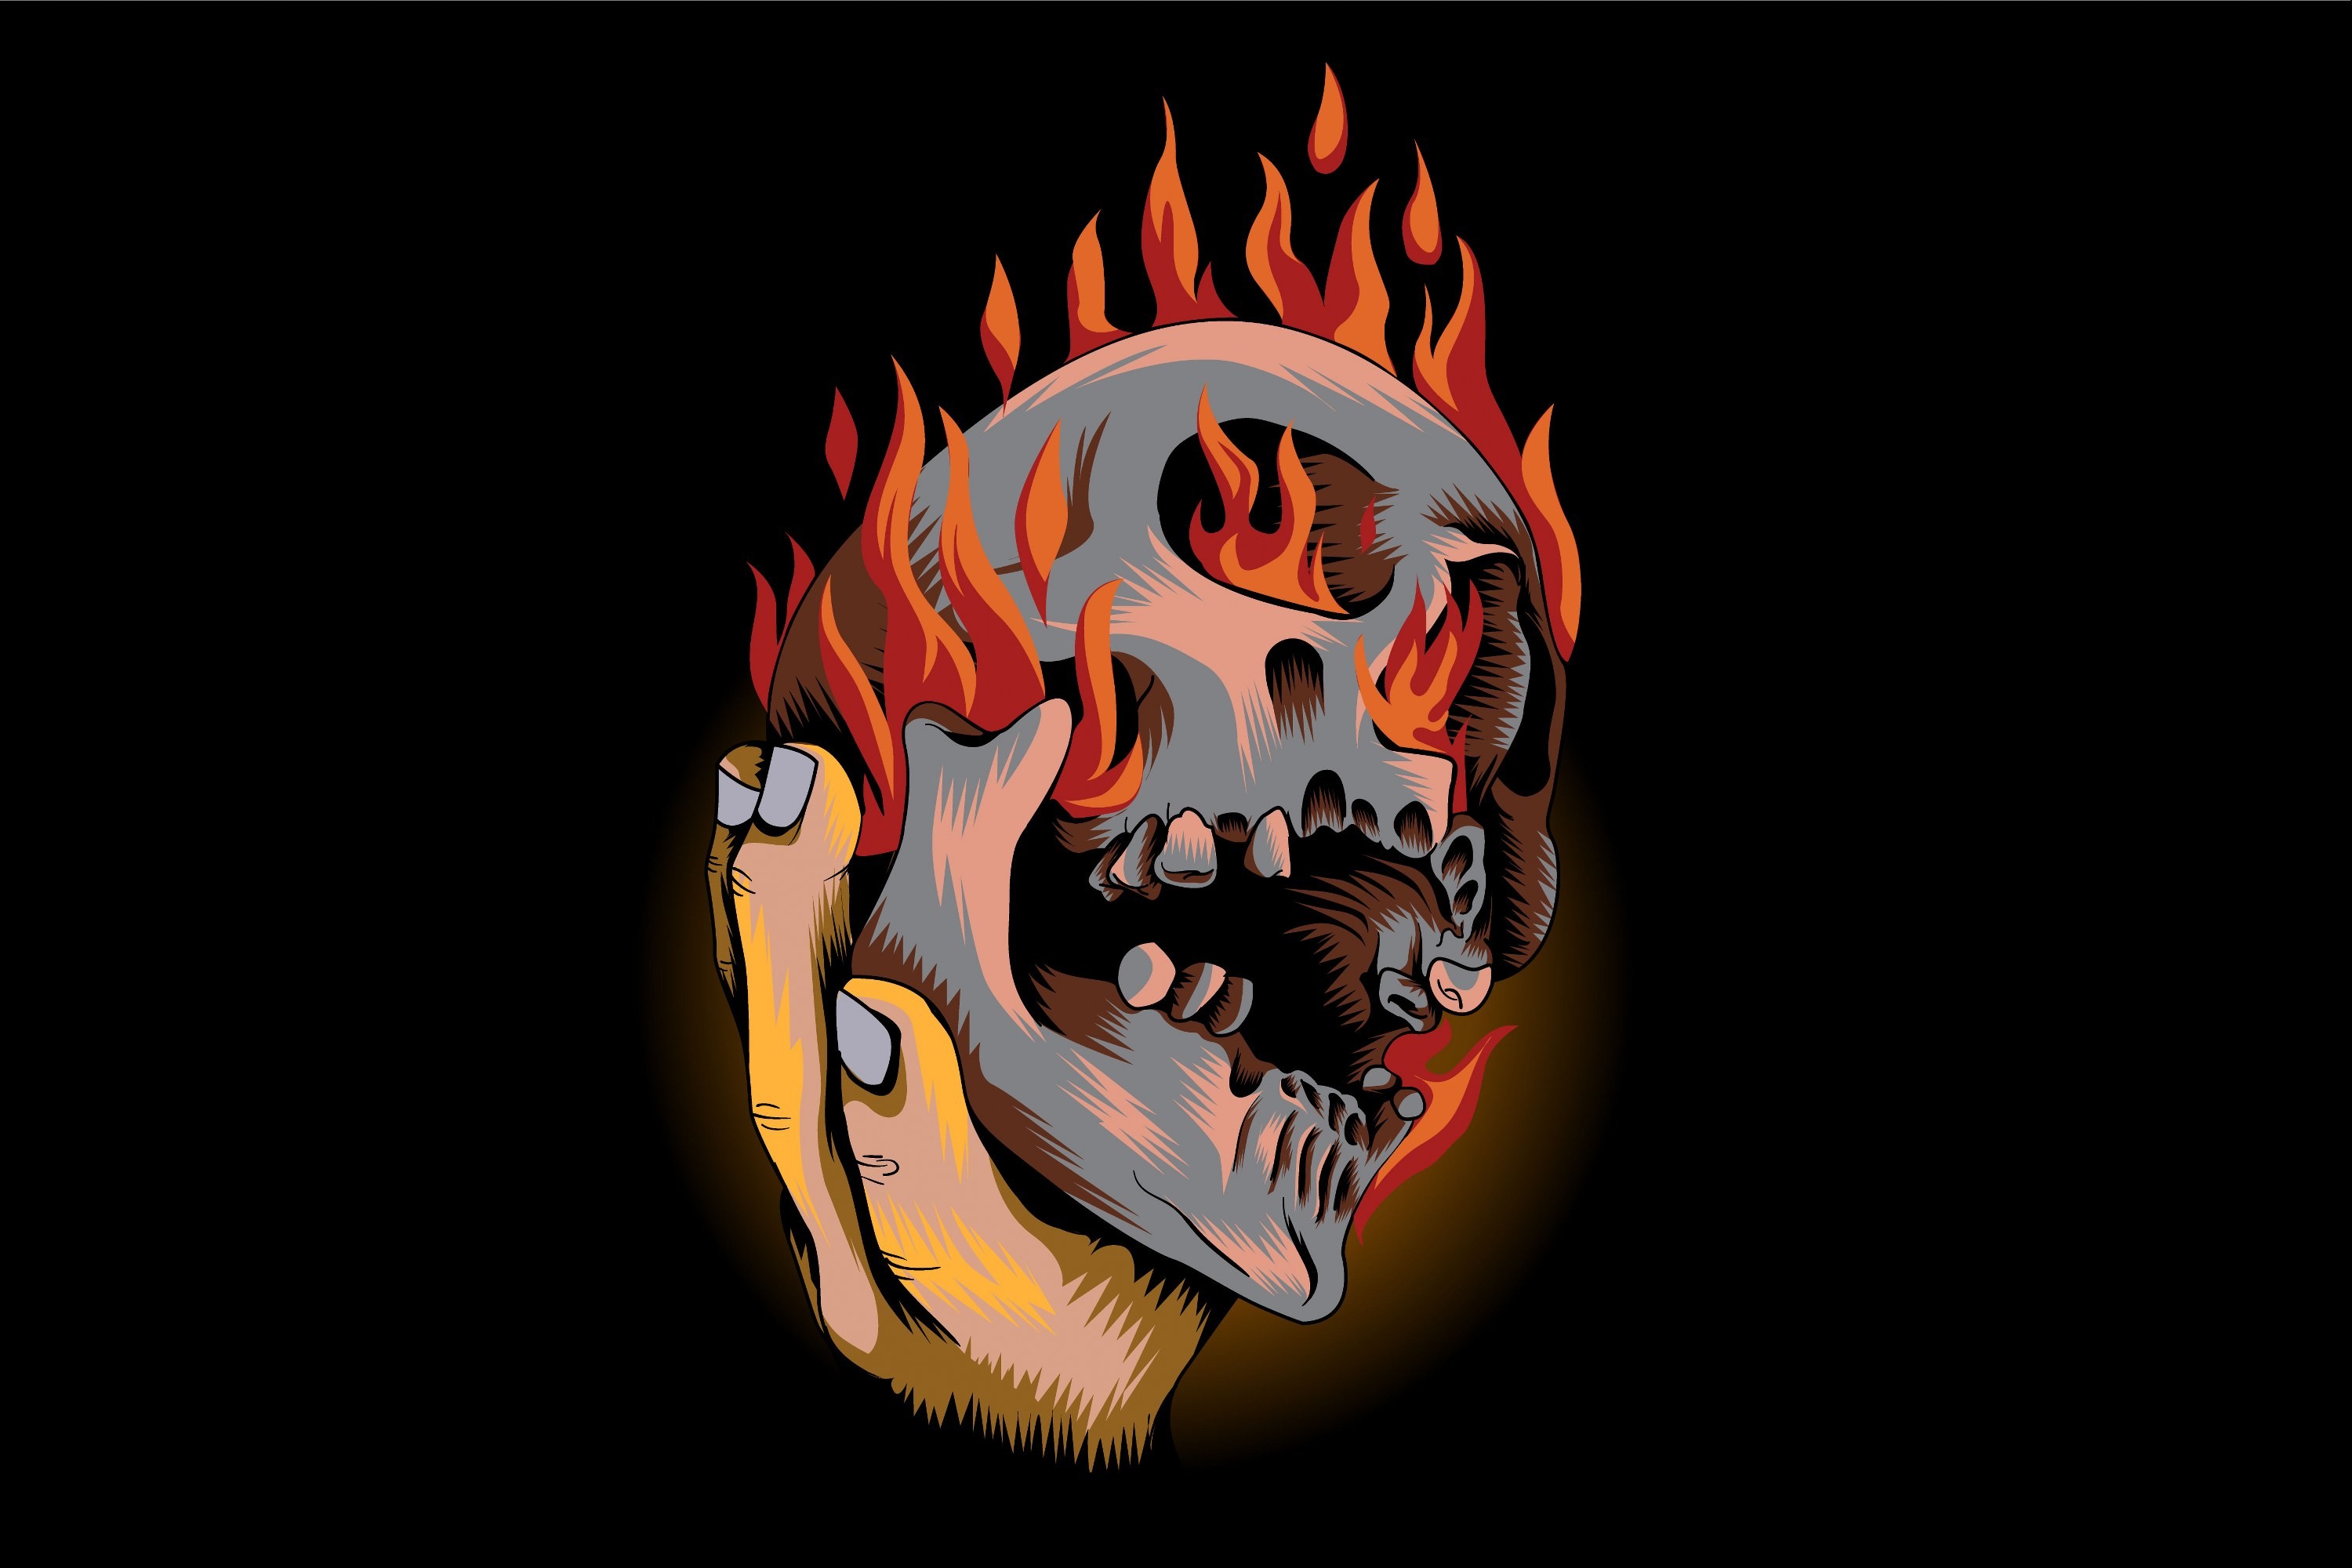 Hands with Skull Fire Illustration Graphic by Epic.Graphic · Creative ...